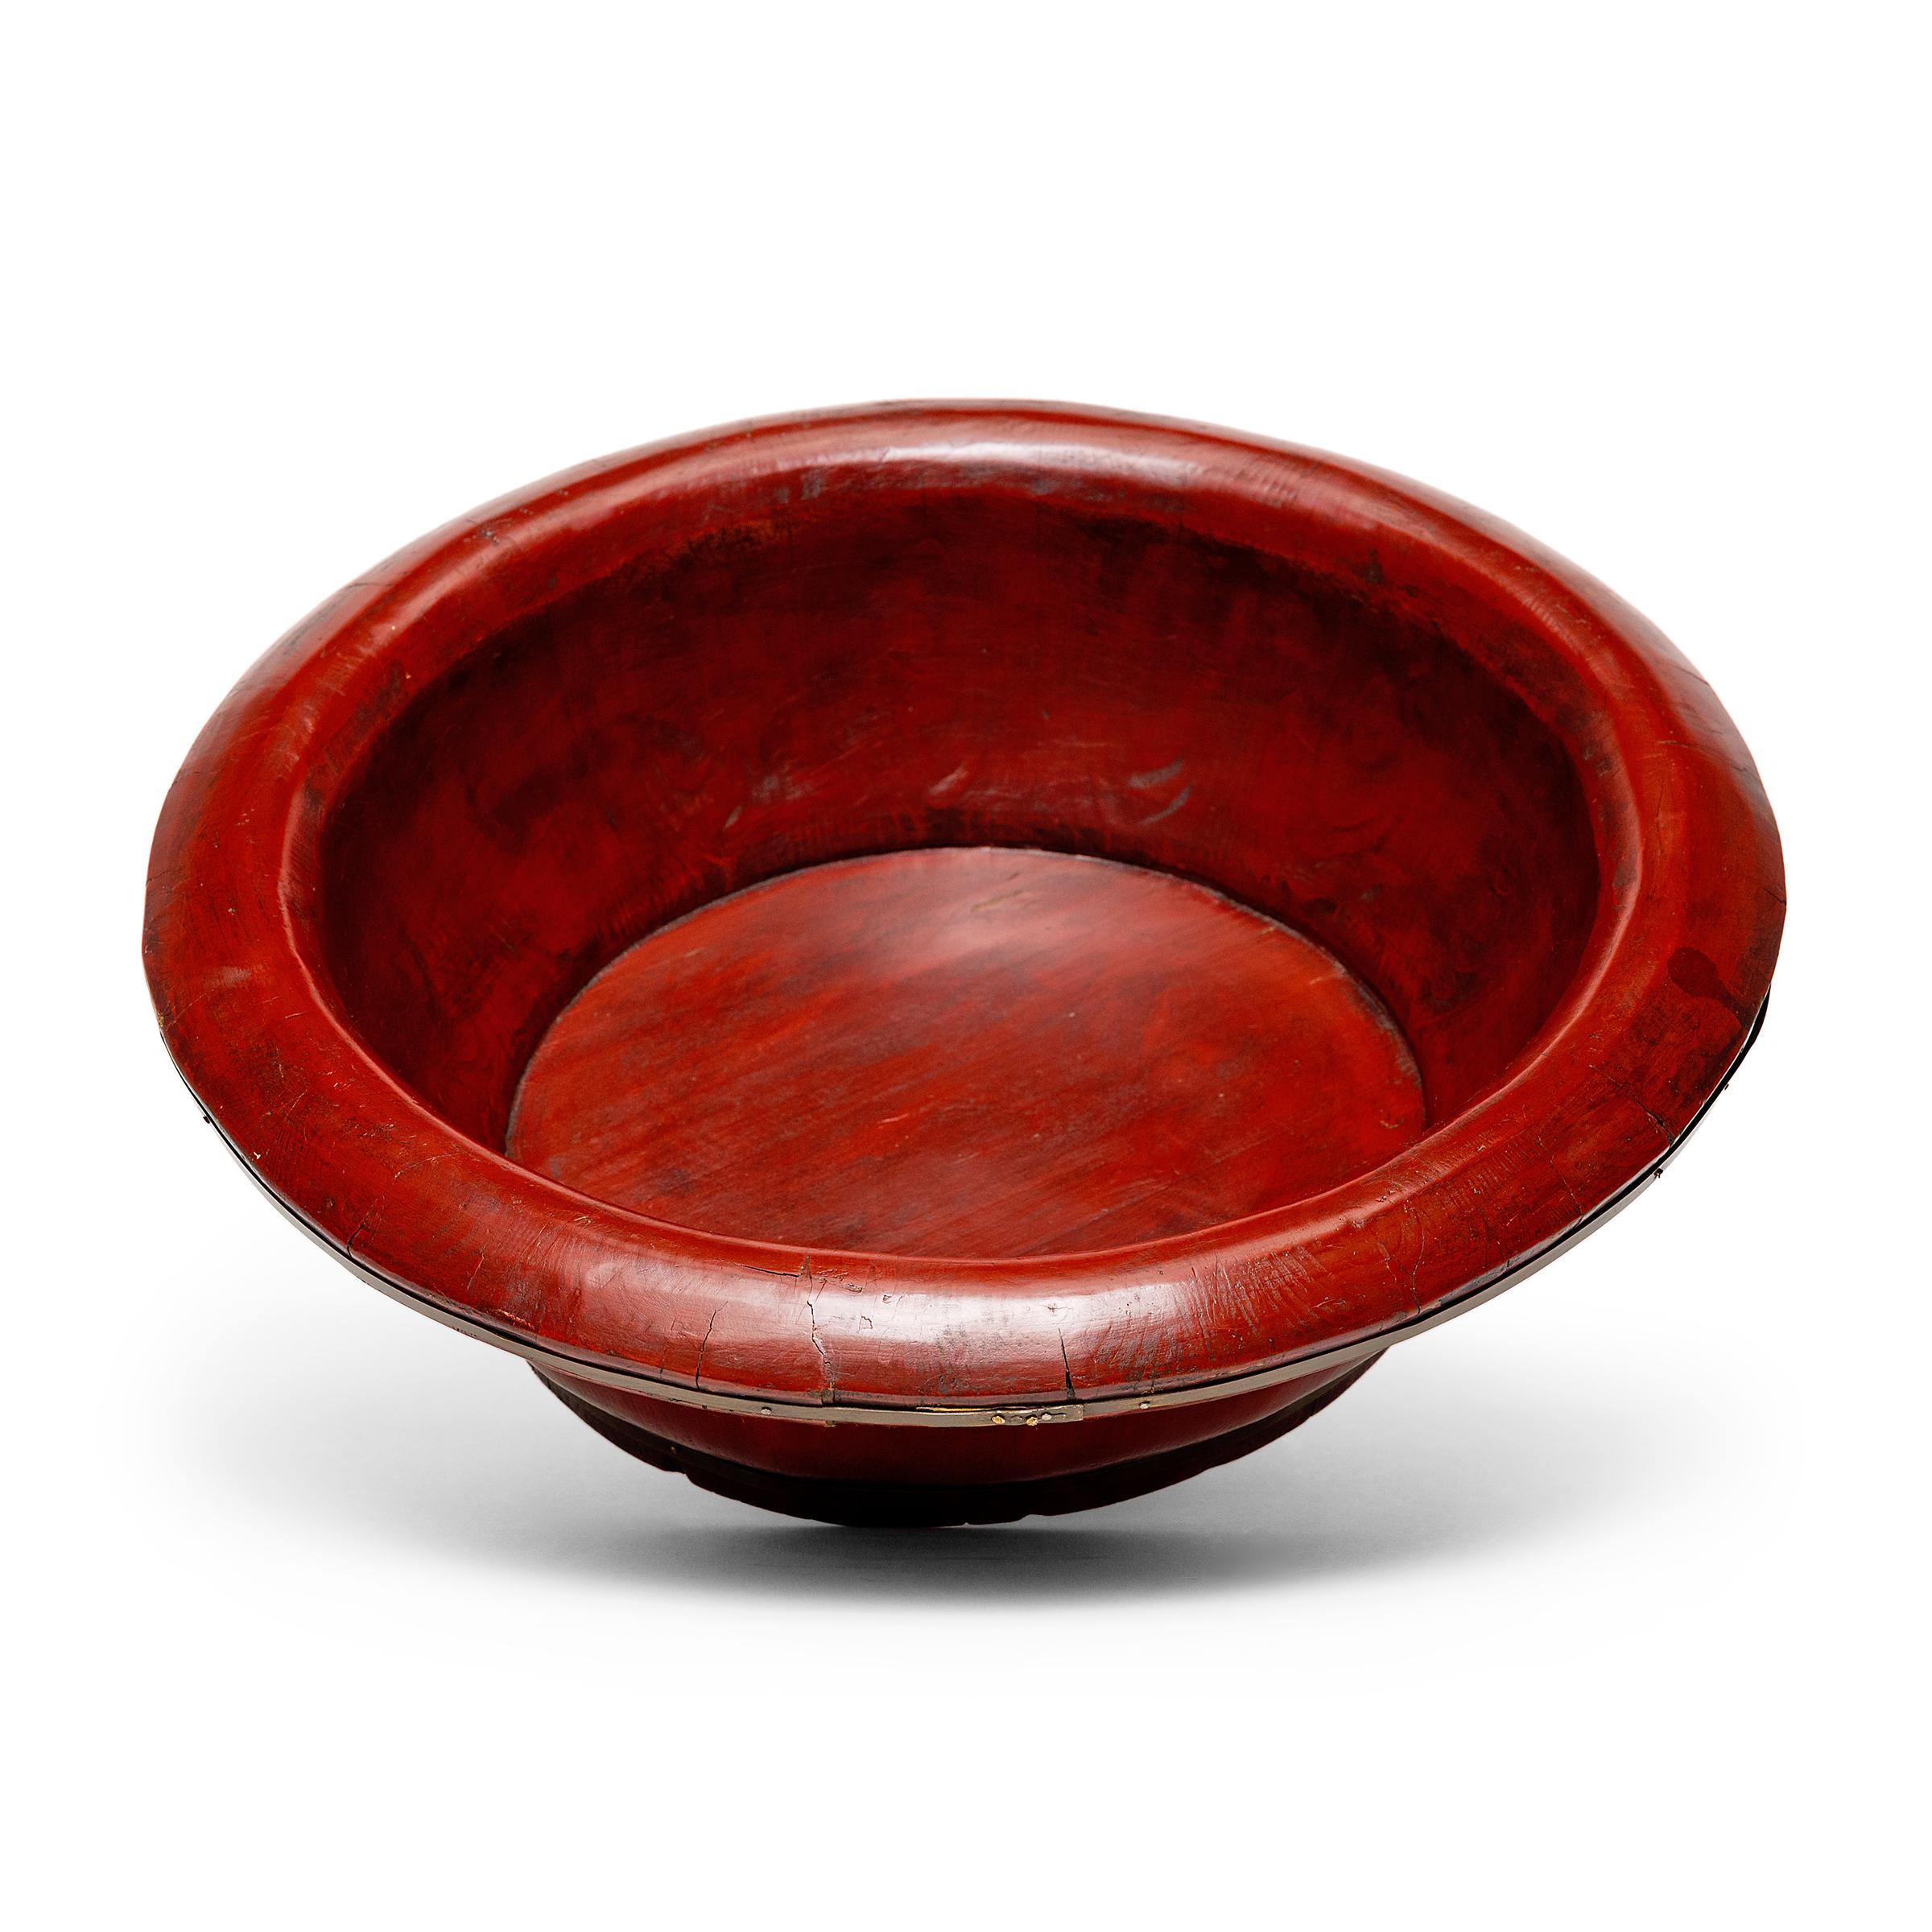 This shallow lacquered bowl dates to the late 19th century and was originally used as a wash basin for fruits and vegetables. The round vessel is crafted like a barrel, with slatted elmwood sides banded with brass strips, a method used for all kinds